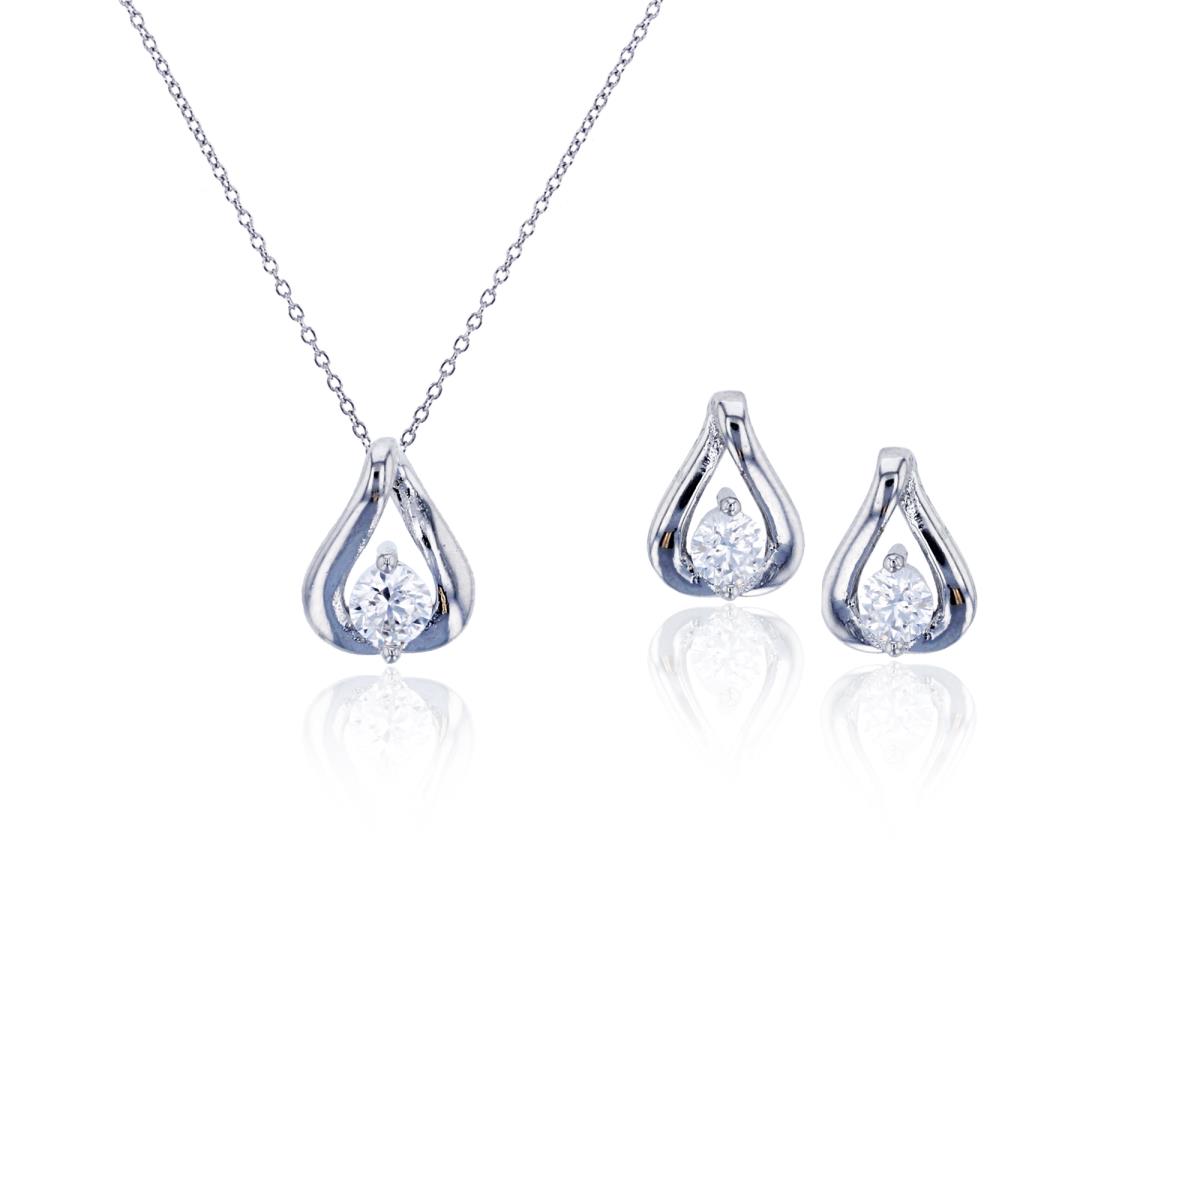 Sterling Silver Rhodium Micropave 3.5mm Rd Teardrop Earring and 18" Necklace Set